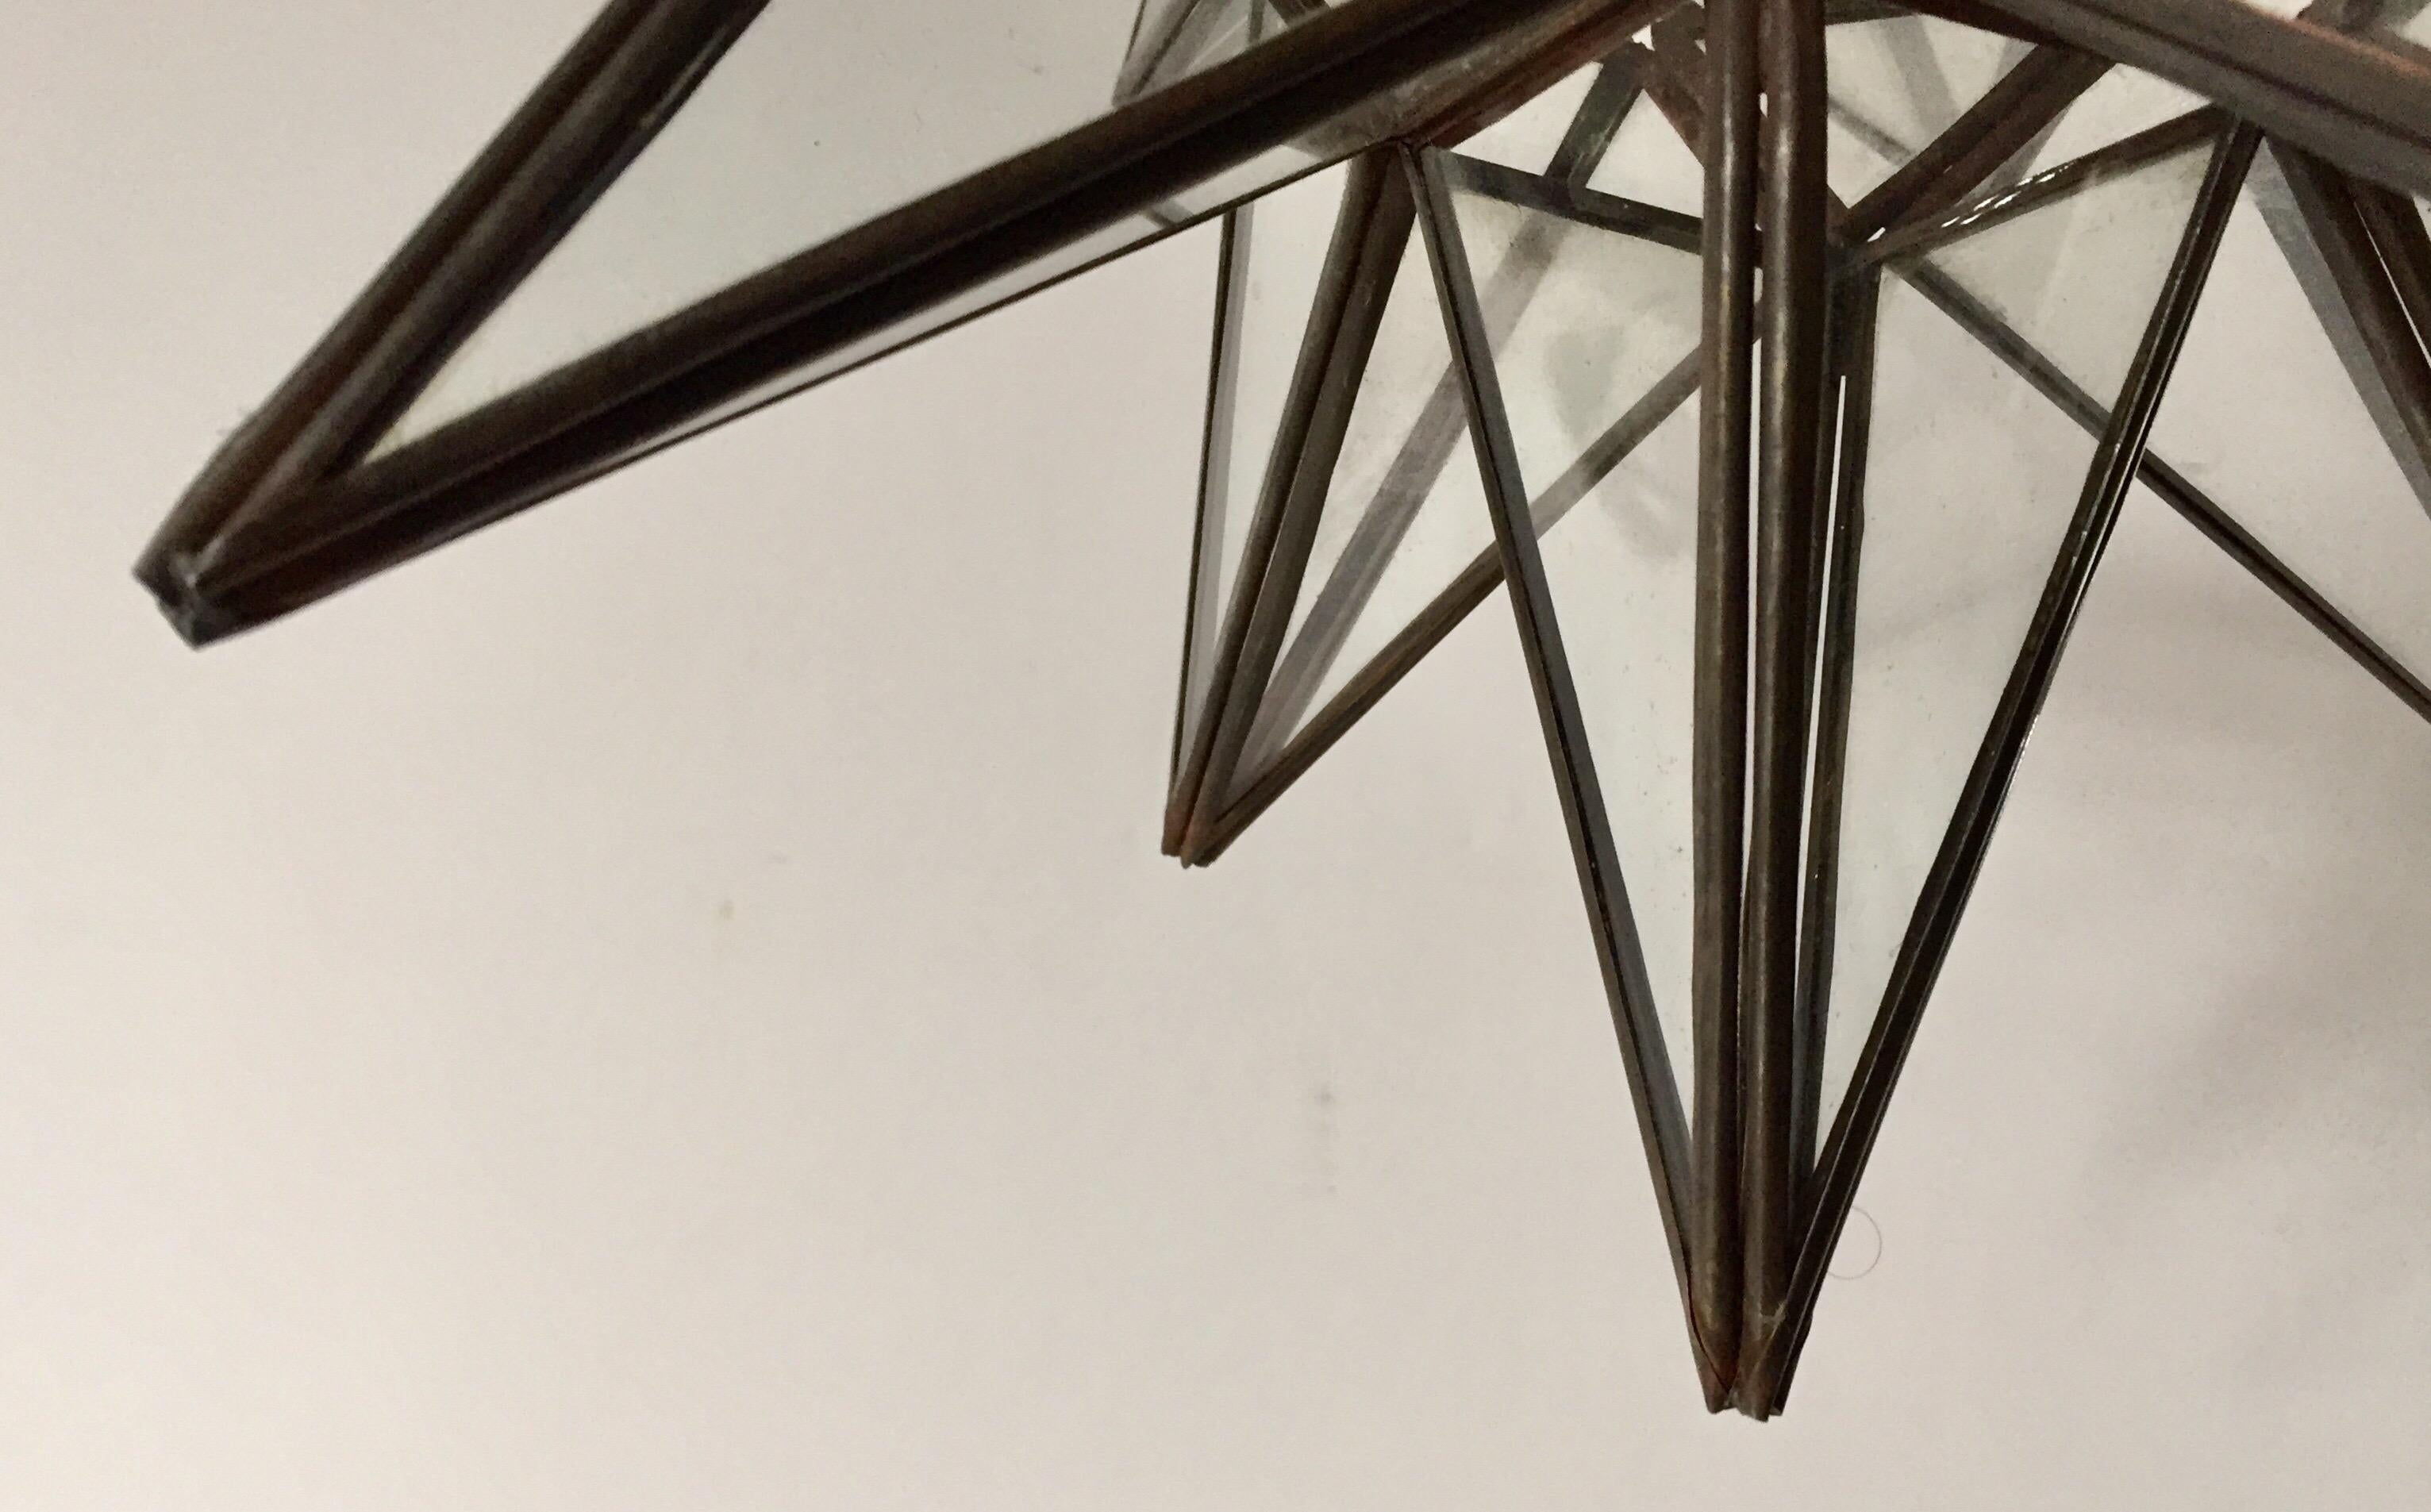 Moroccan clear glass and metal framed Moravian star shape lantern A beautiful vintage geometric metal and glass star pendant. Multifaceted large star lantern with glass panels that form geometrical shapes similar to Moravian stars. The lantern has